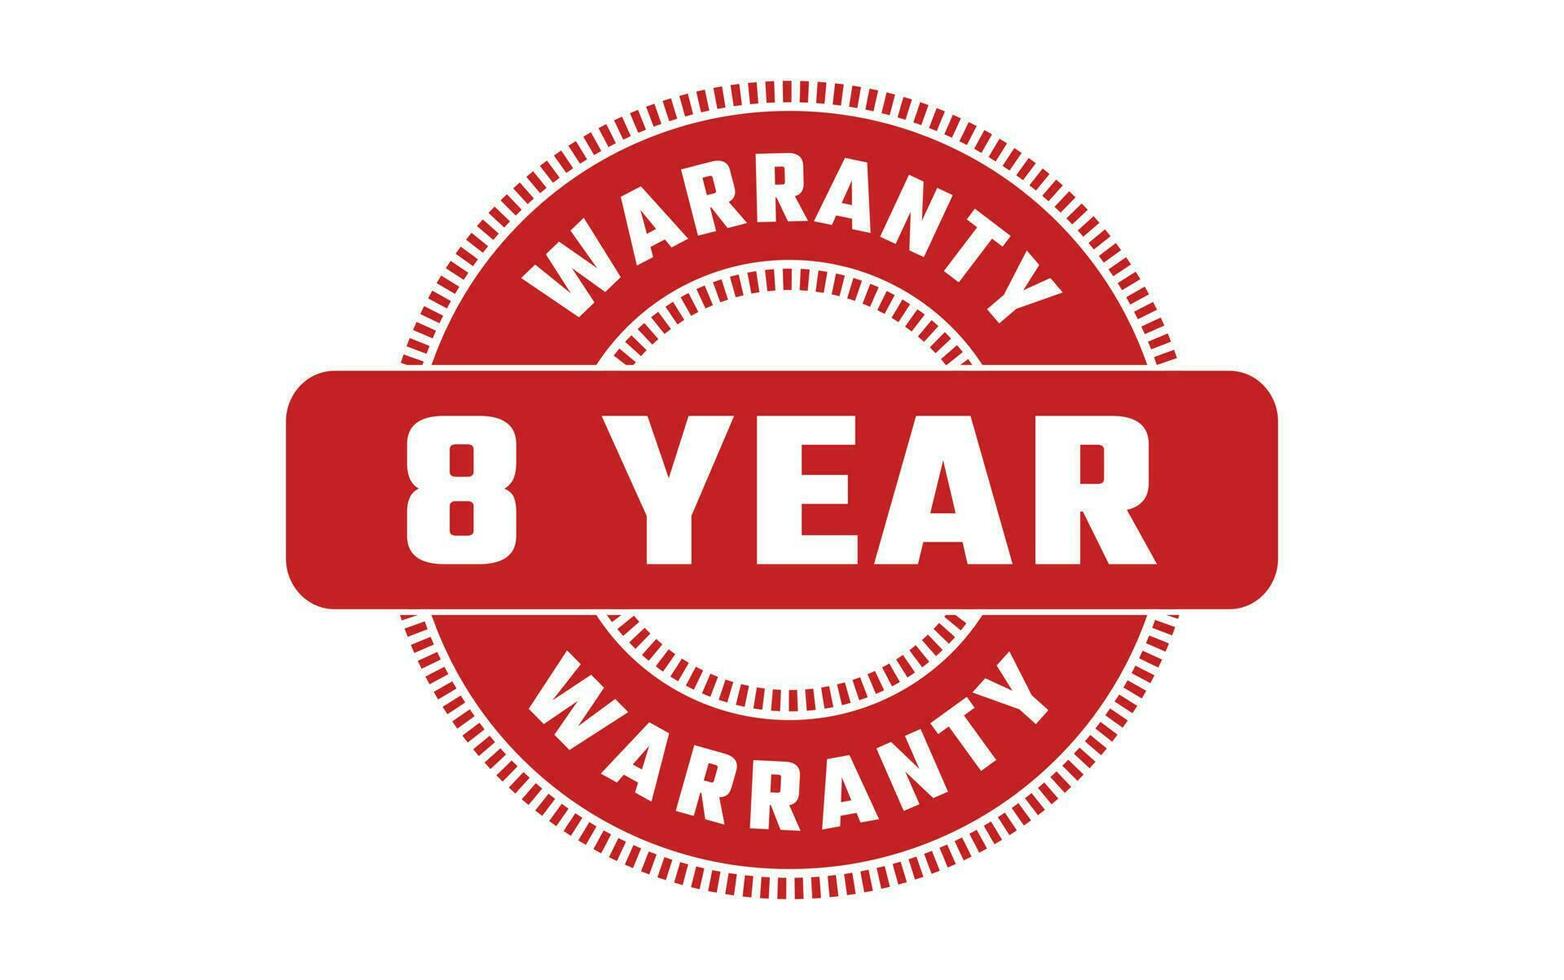 8 Year Warranty Rubber Stamp vector